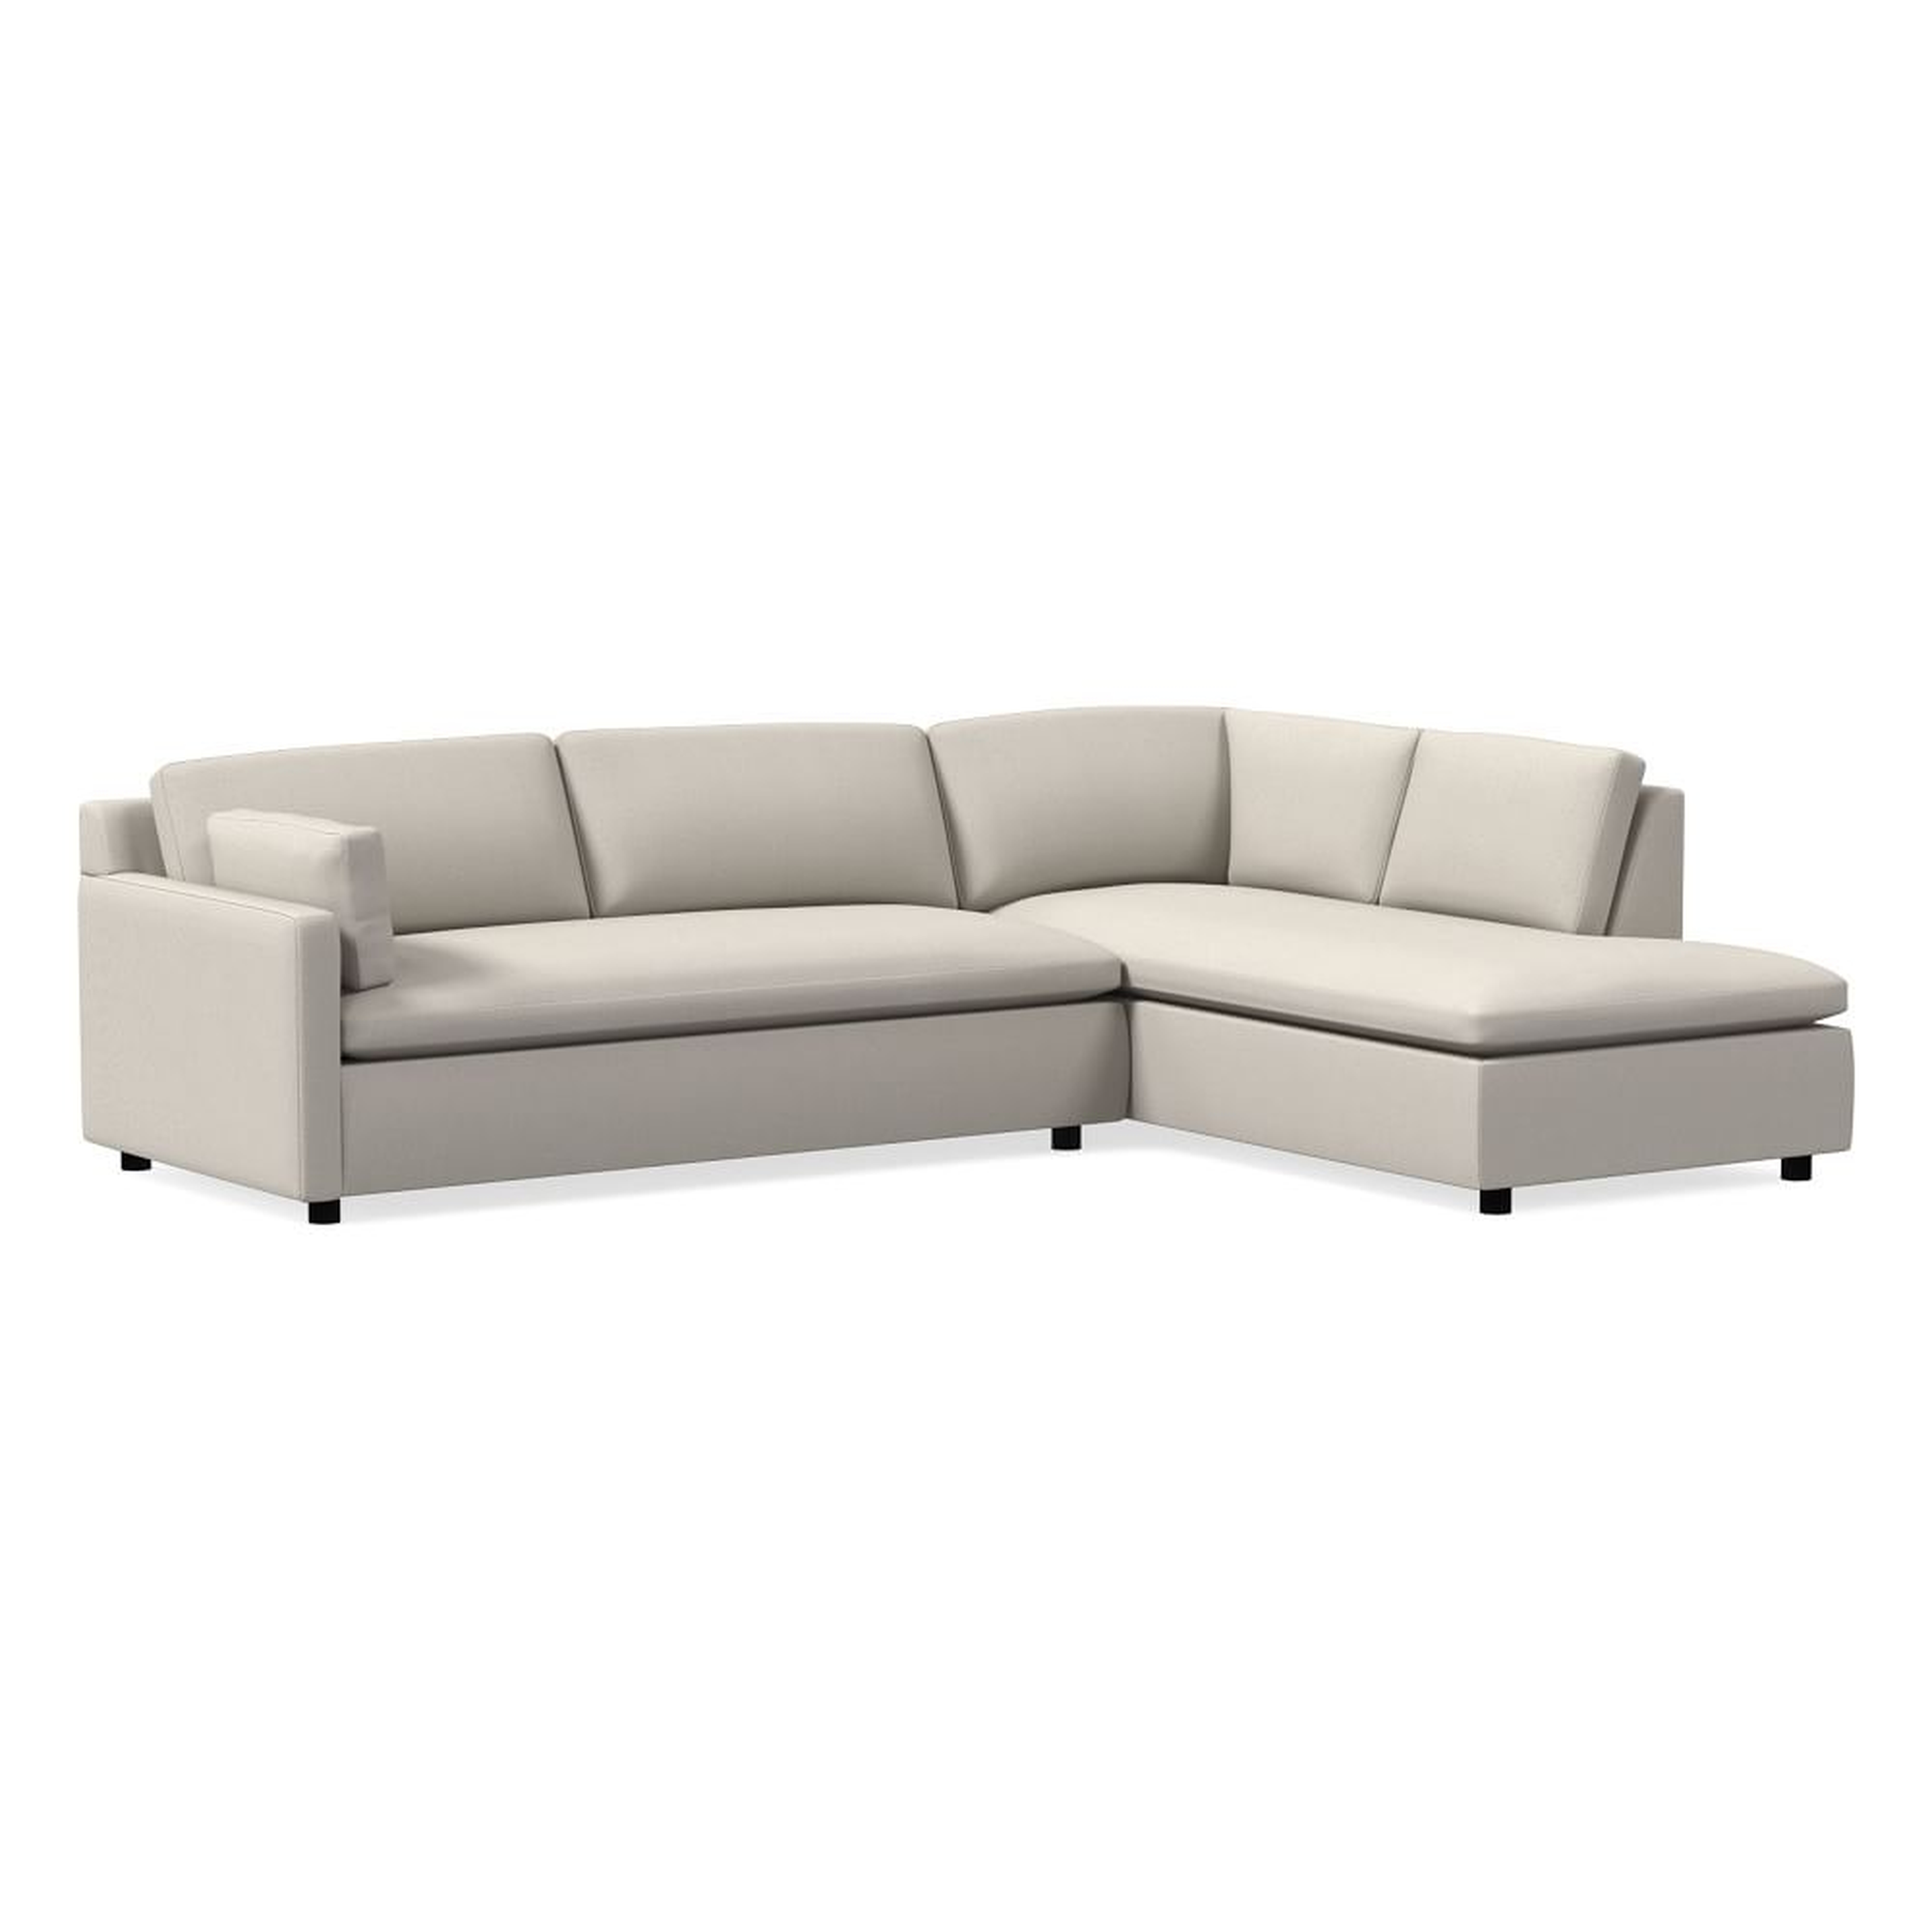 Marin 114" Right Bumper Chaise Sectional, Standard Depth, Performance Yarn Dyed Linen Weave, Alabaster - West Elm